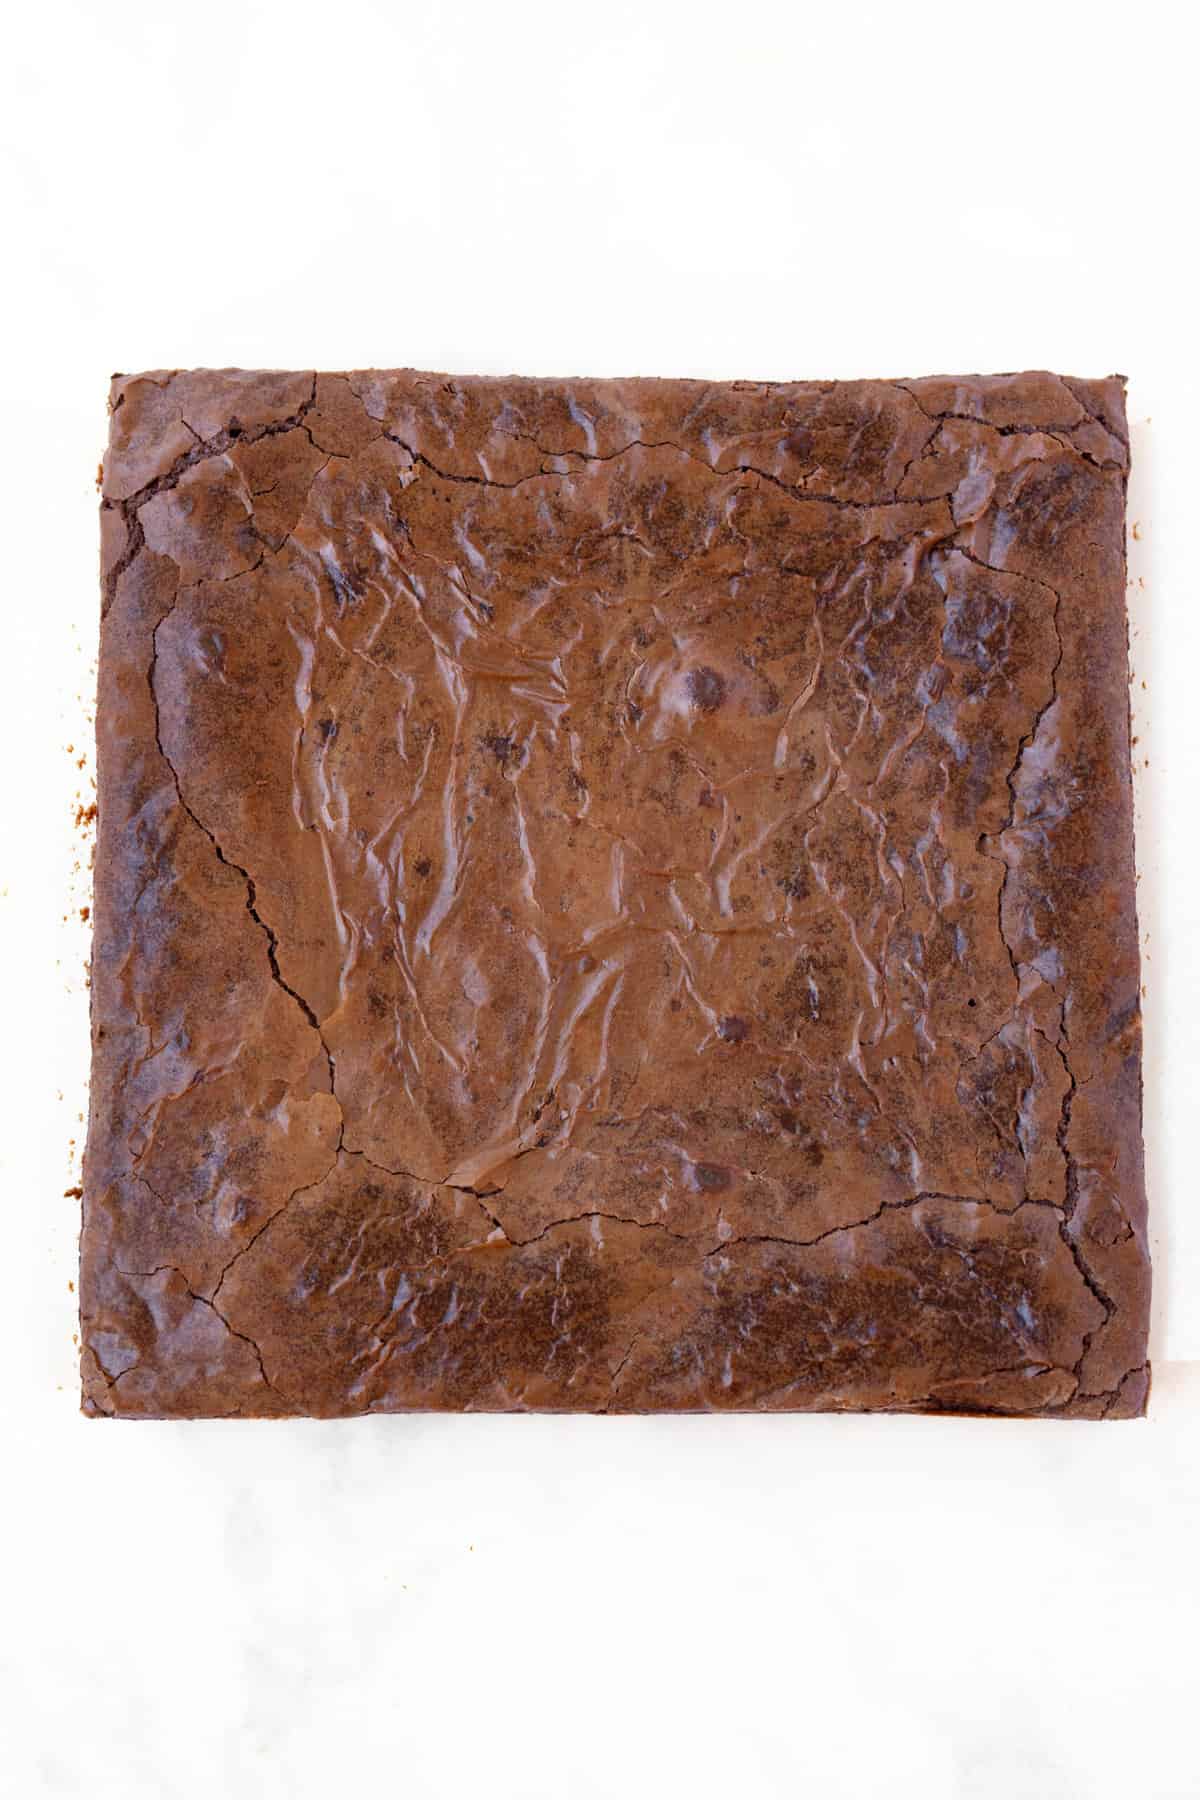 Top view of a homemade Shiny Top Brownie on a white background.